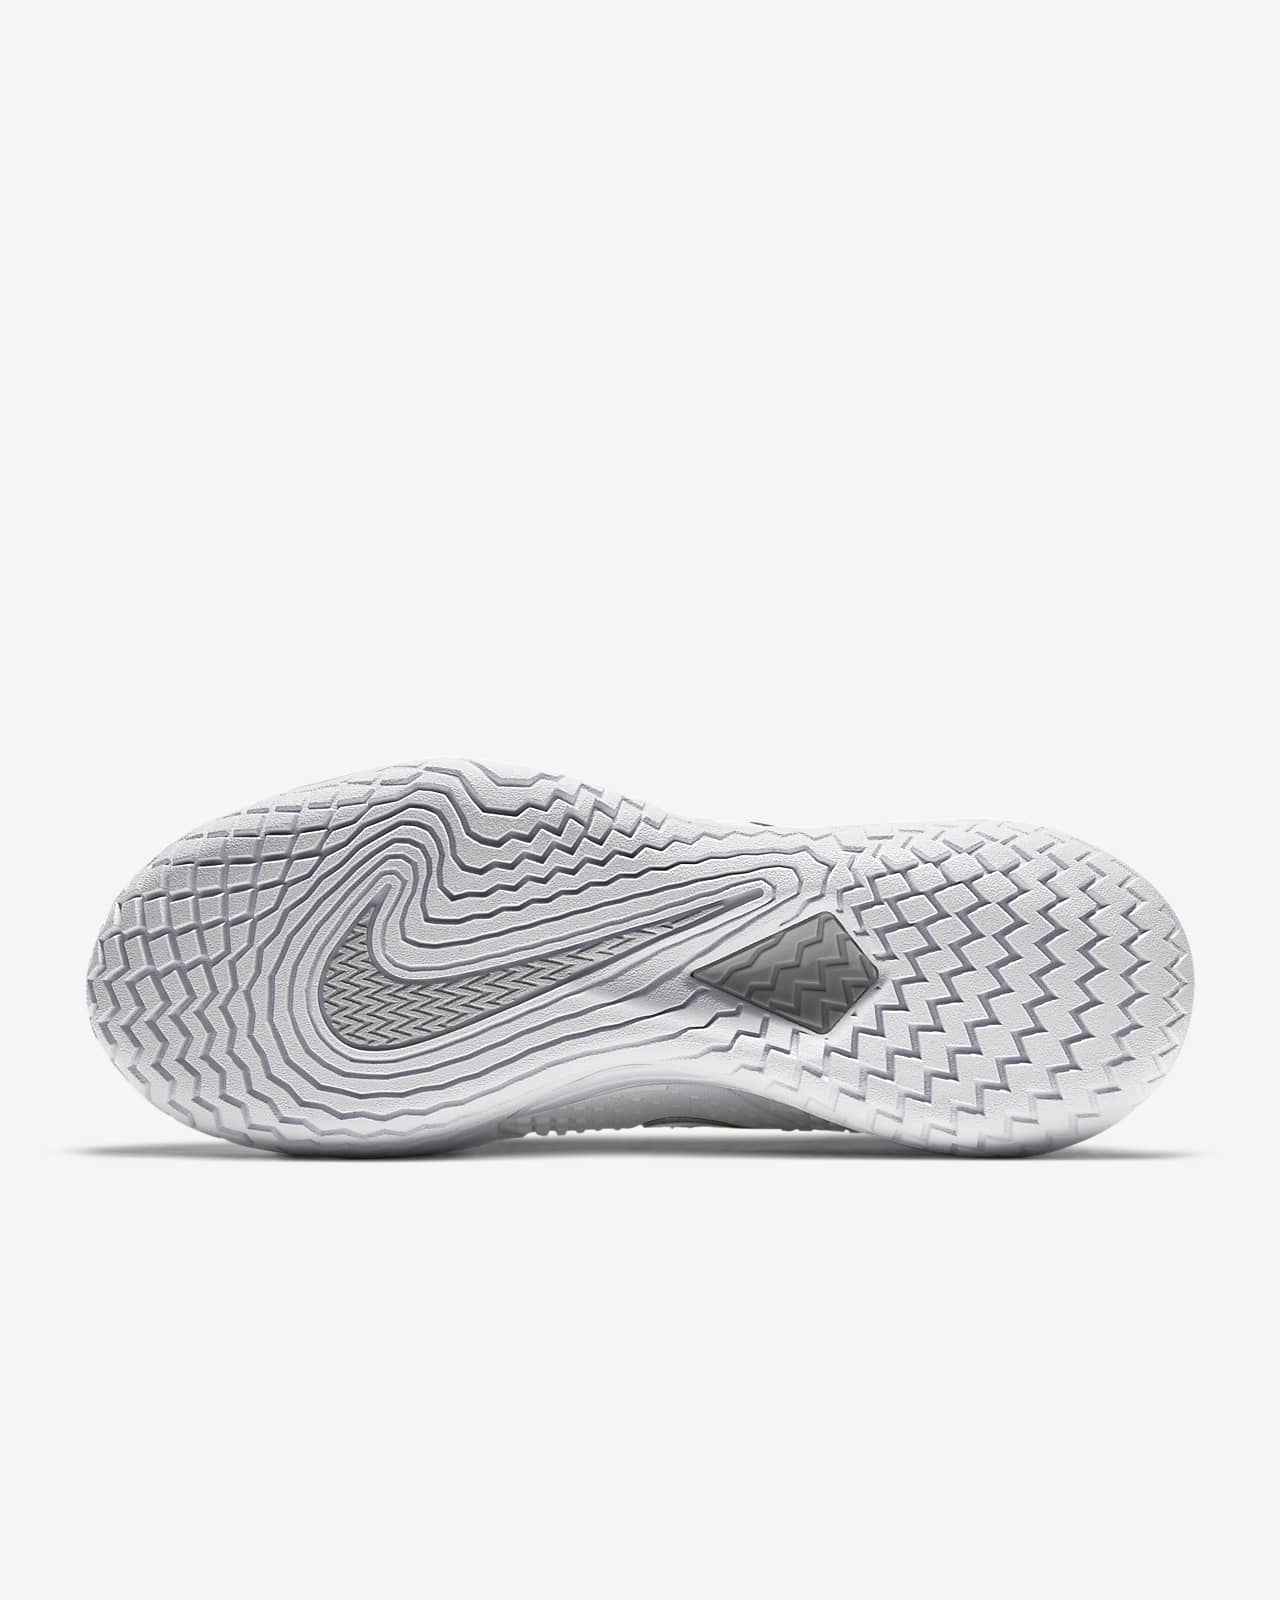 nike air cage court women's